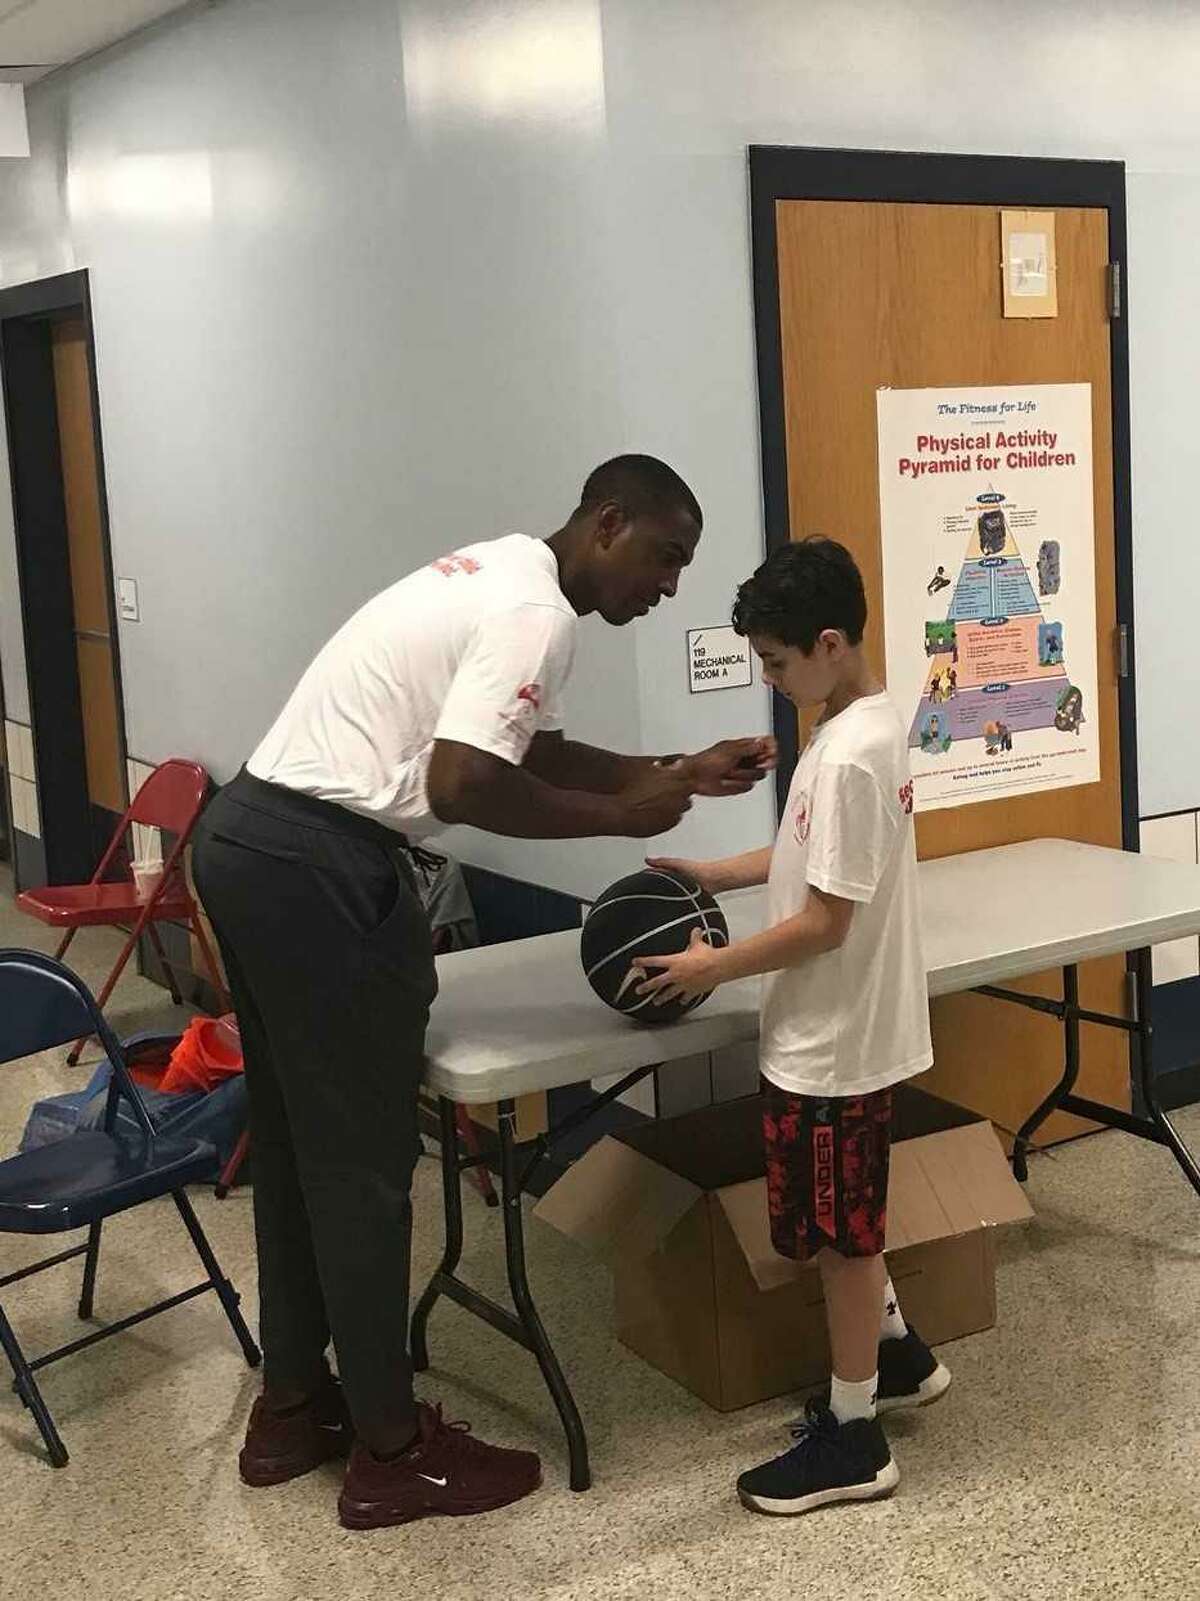 Former UConn coach Kevin Ollie signs an autograph during a charity event in Gales Ferry. (Jeff Jacobs/Hearst Connecticut Media Group )